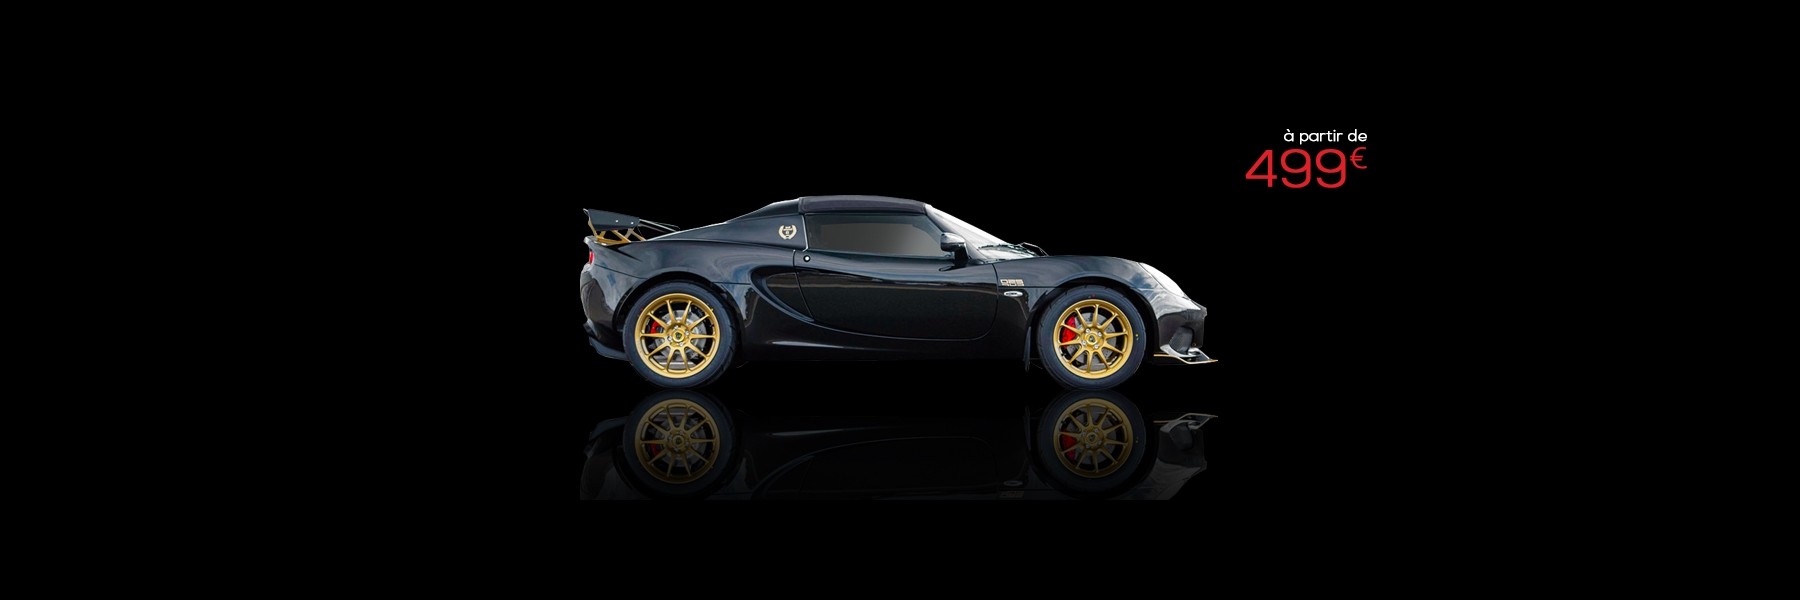 Lotus Driving experience